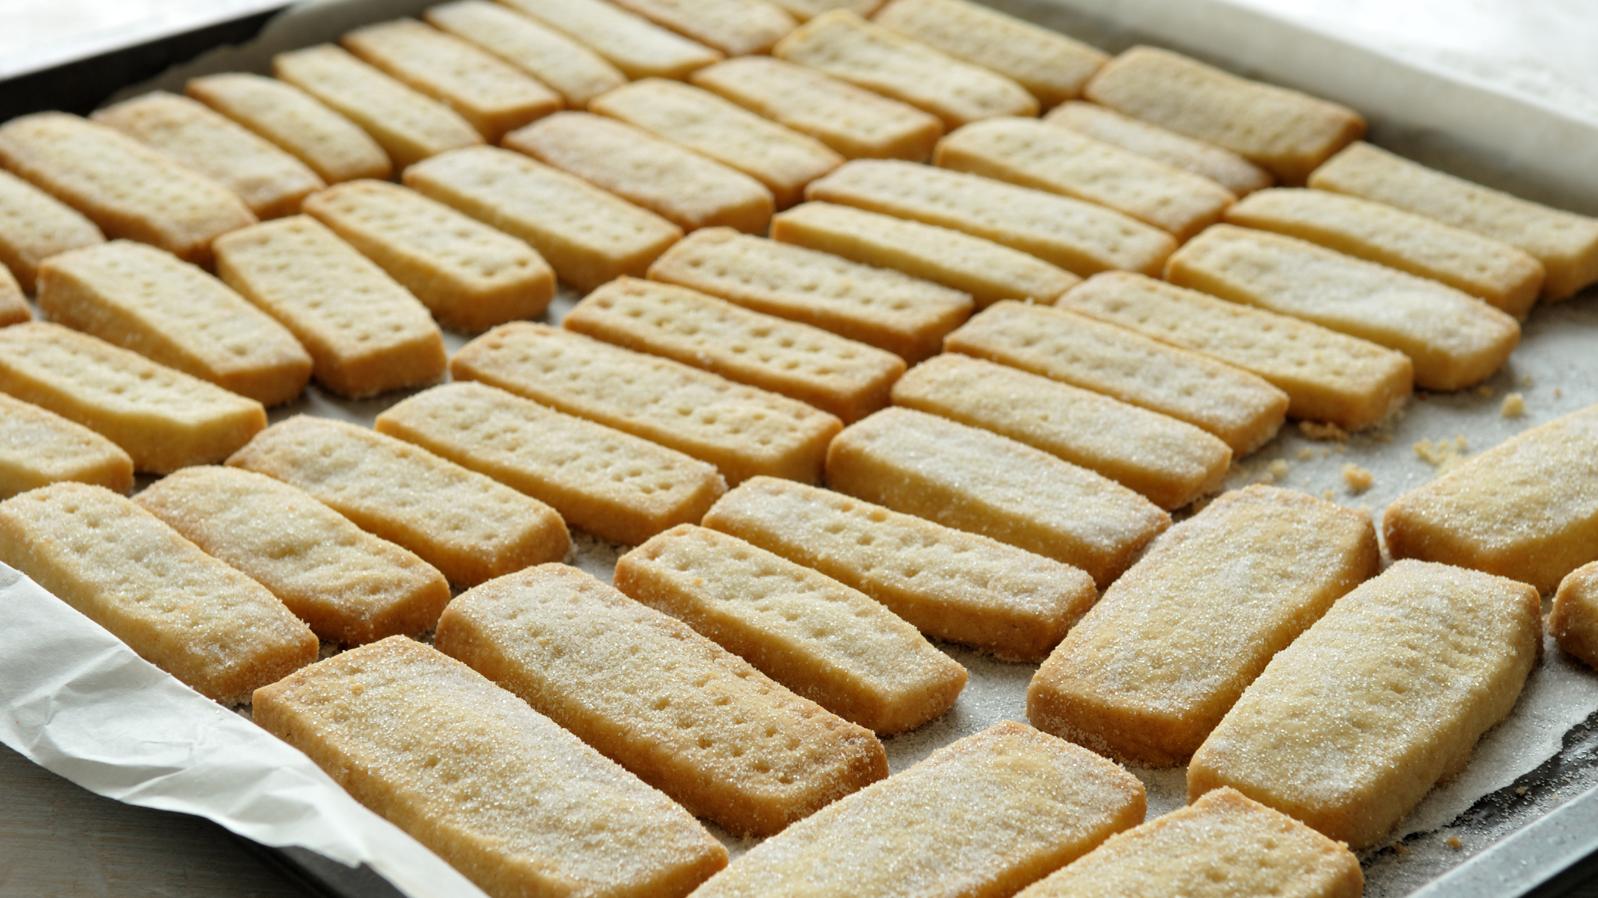  A simple yet irresistible classic: English Shortbread.